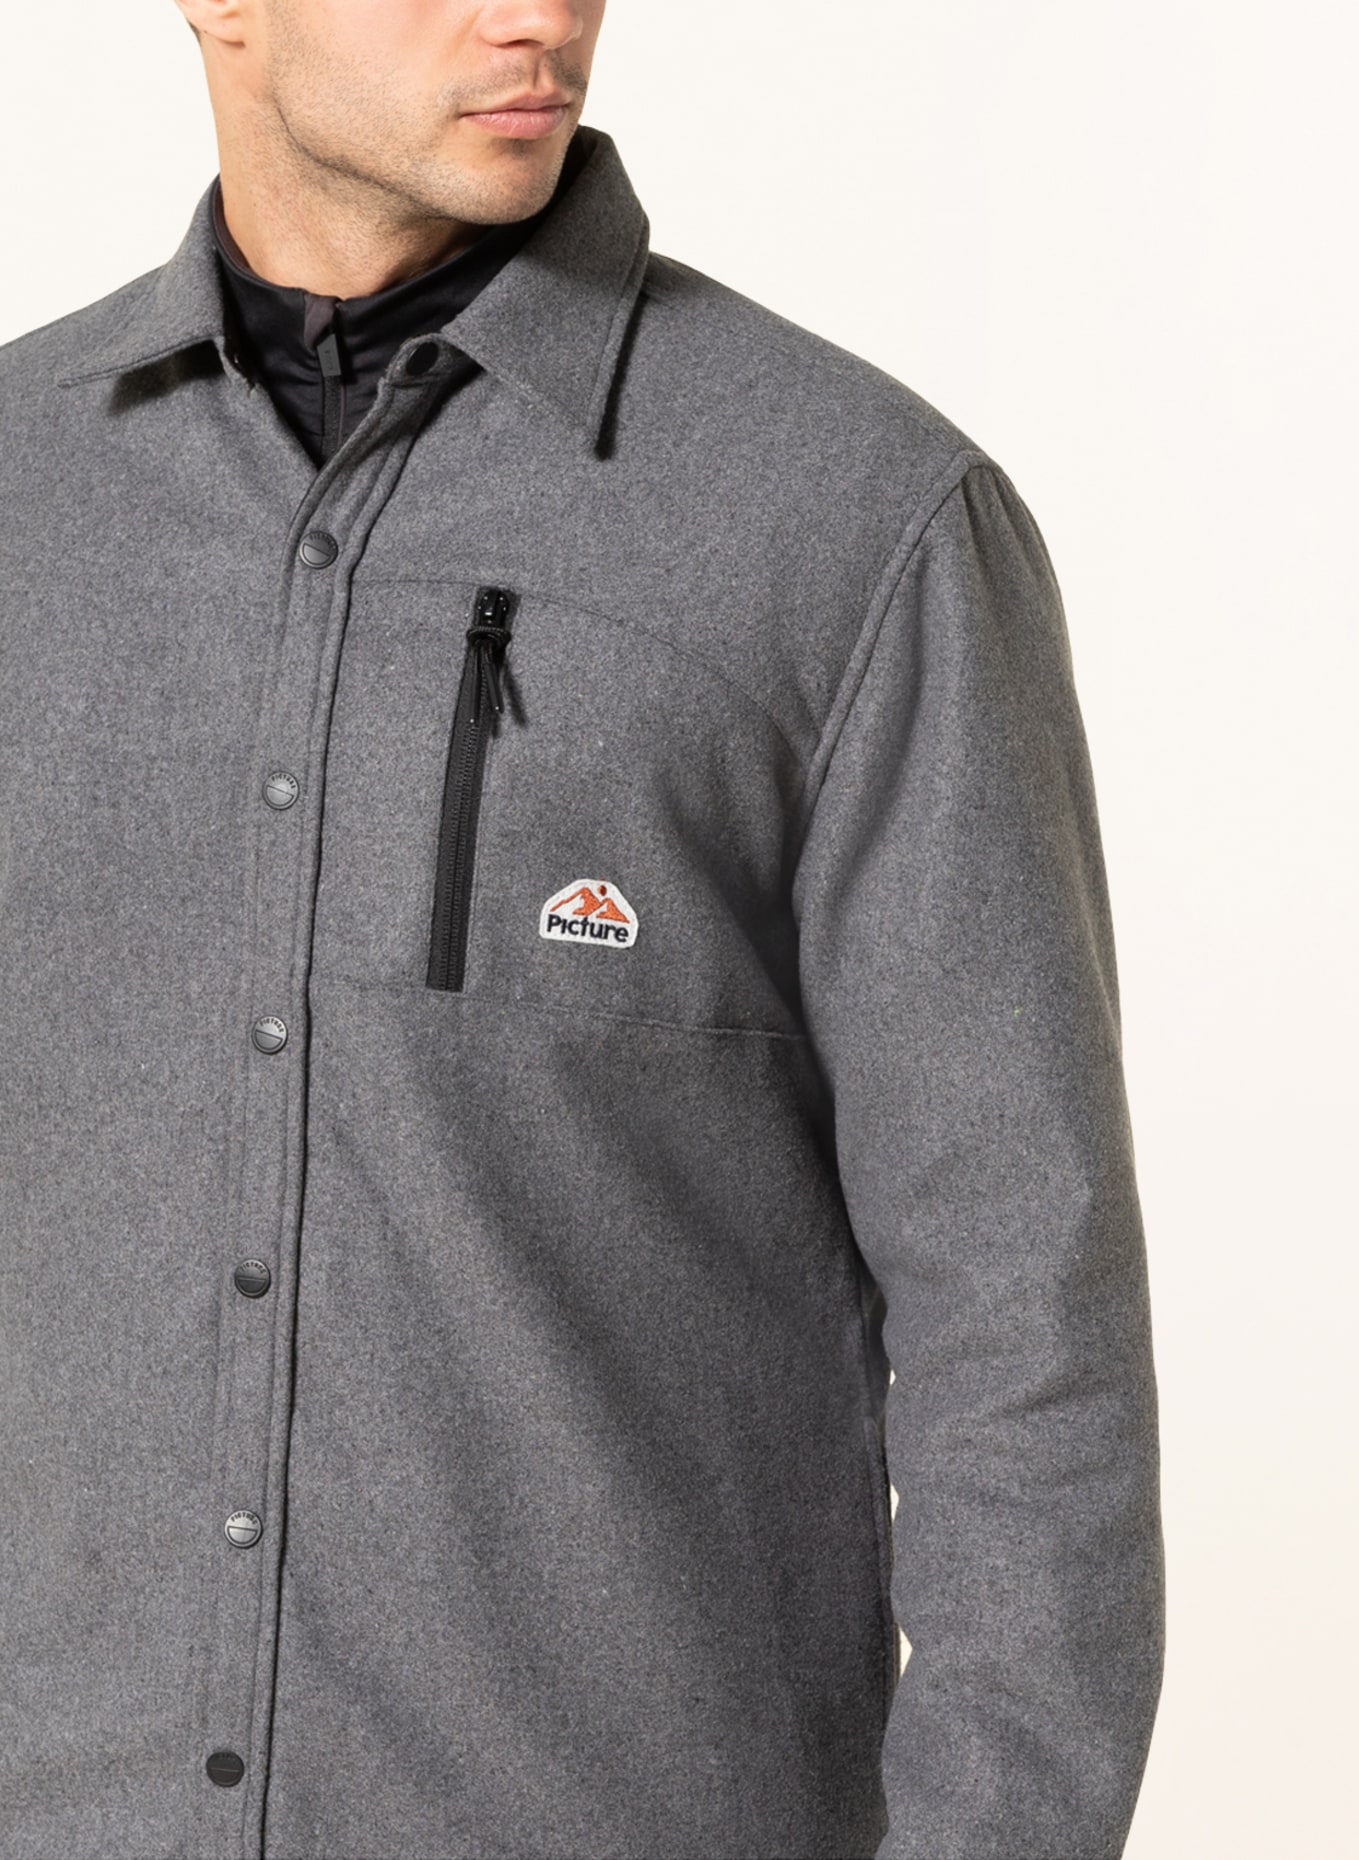 PICTURE Overshirt COLTONE, Color: GRAY (Image 4)